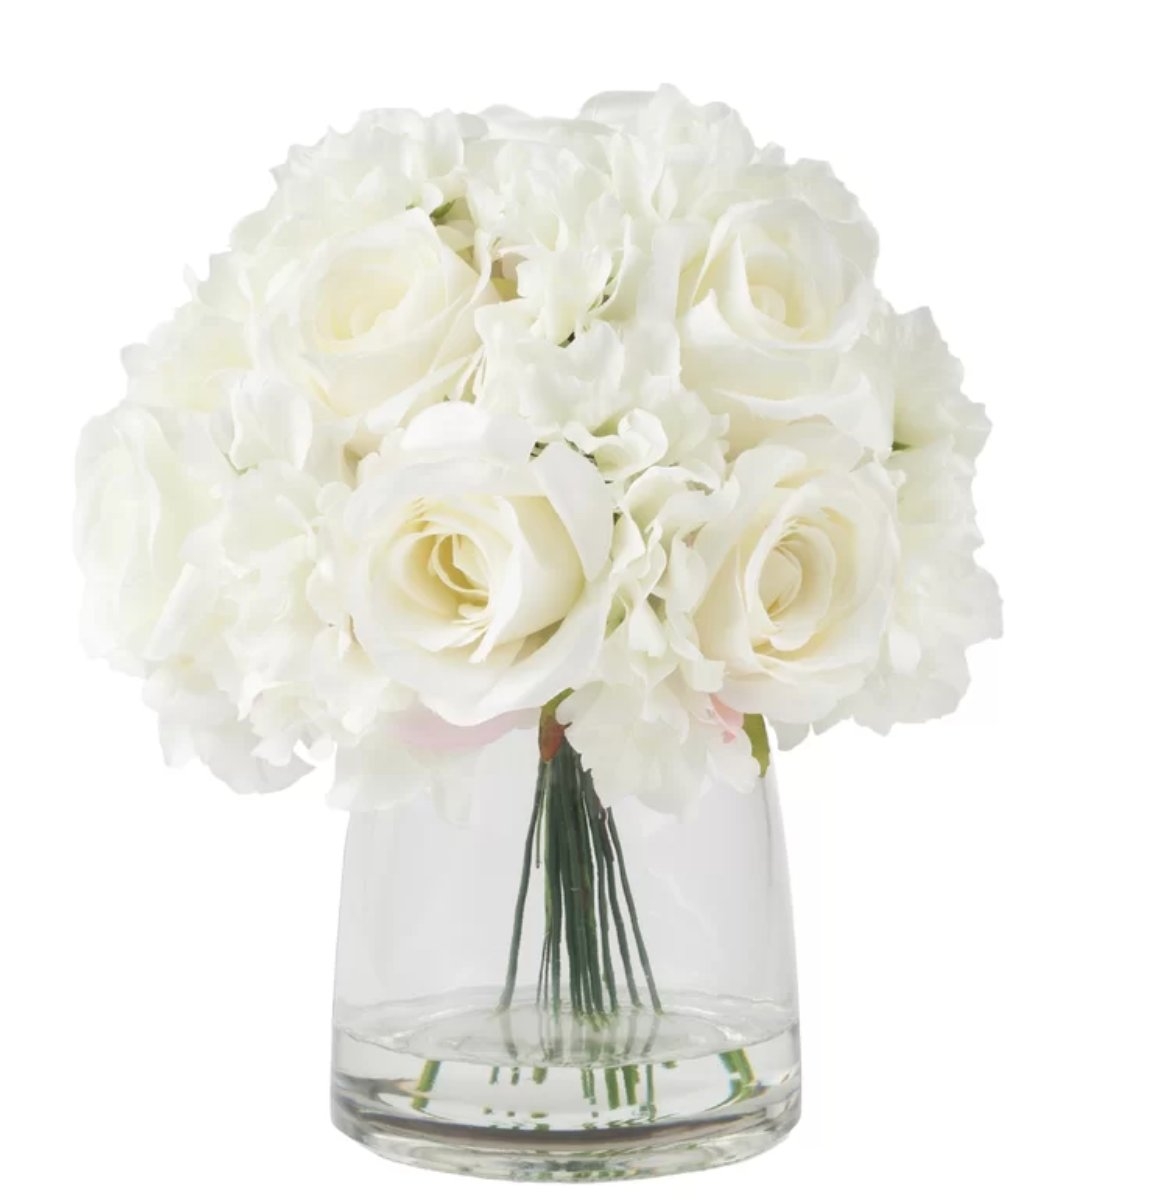 Artificial Rose and Hydrangea Floral Arrangement in Vase - Image 1